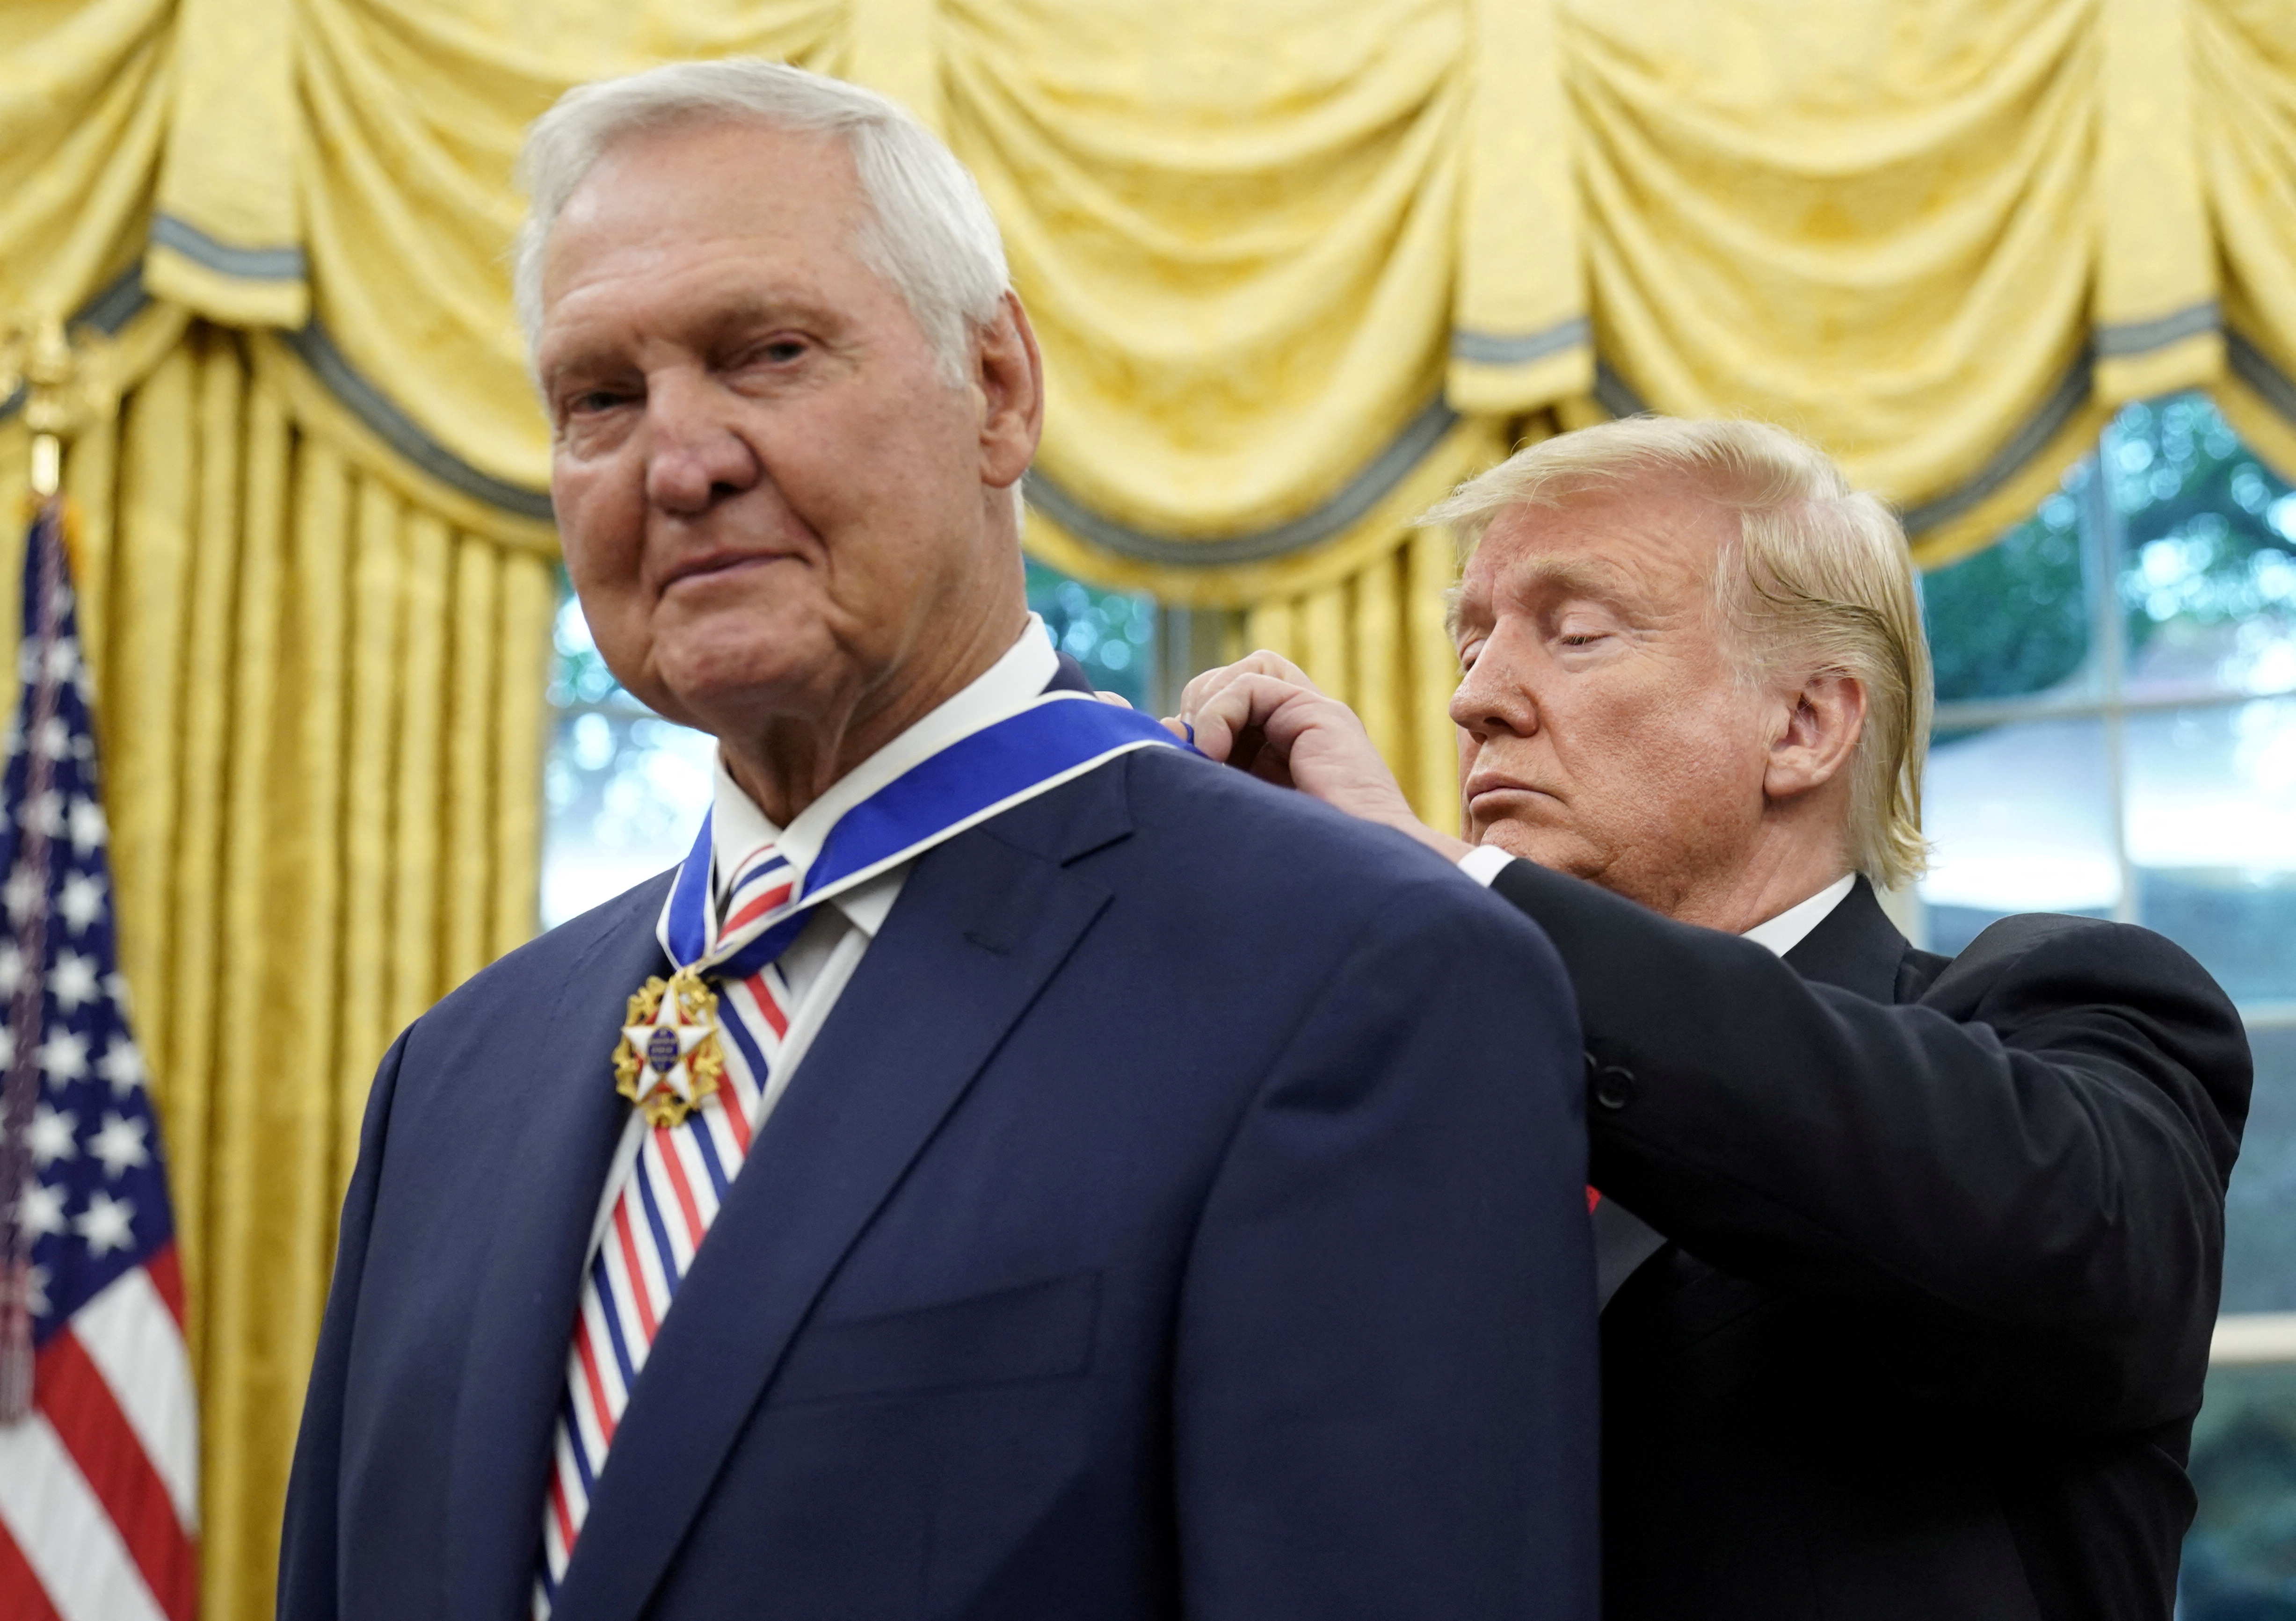 U.S. President Trump awards Presidential Medal of Freedom to NBA Hall of Famer Jerry West at the White House in Washington